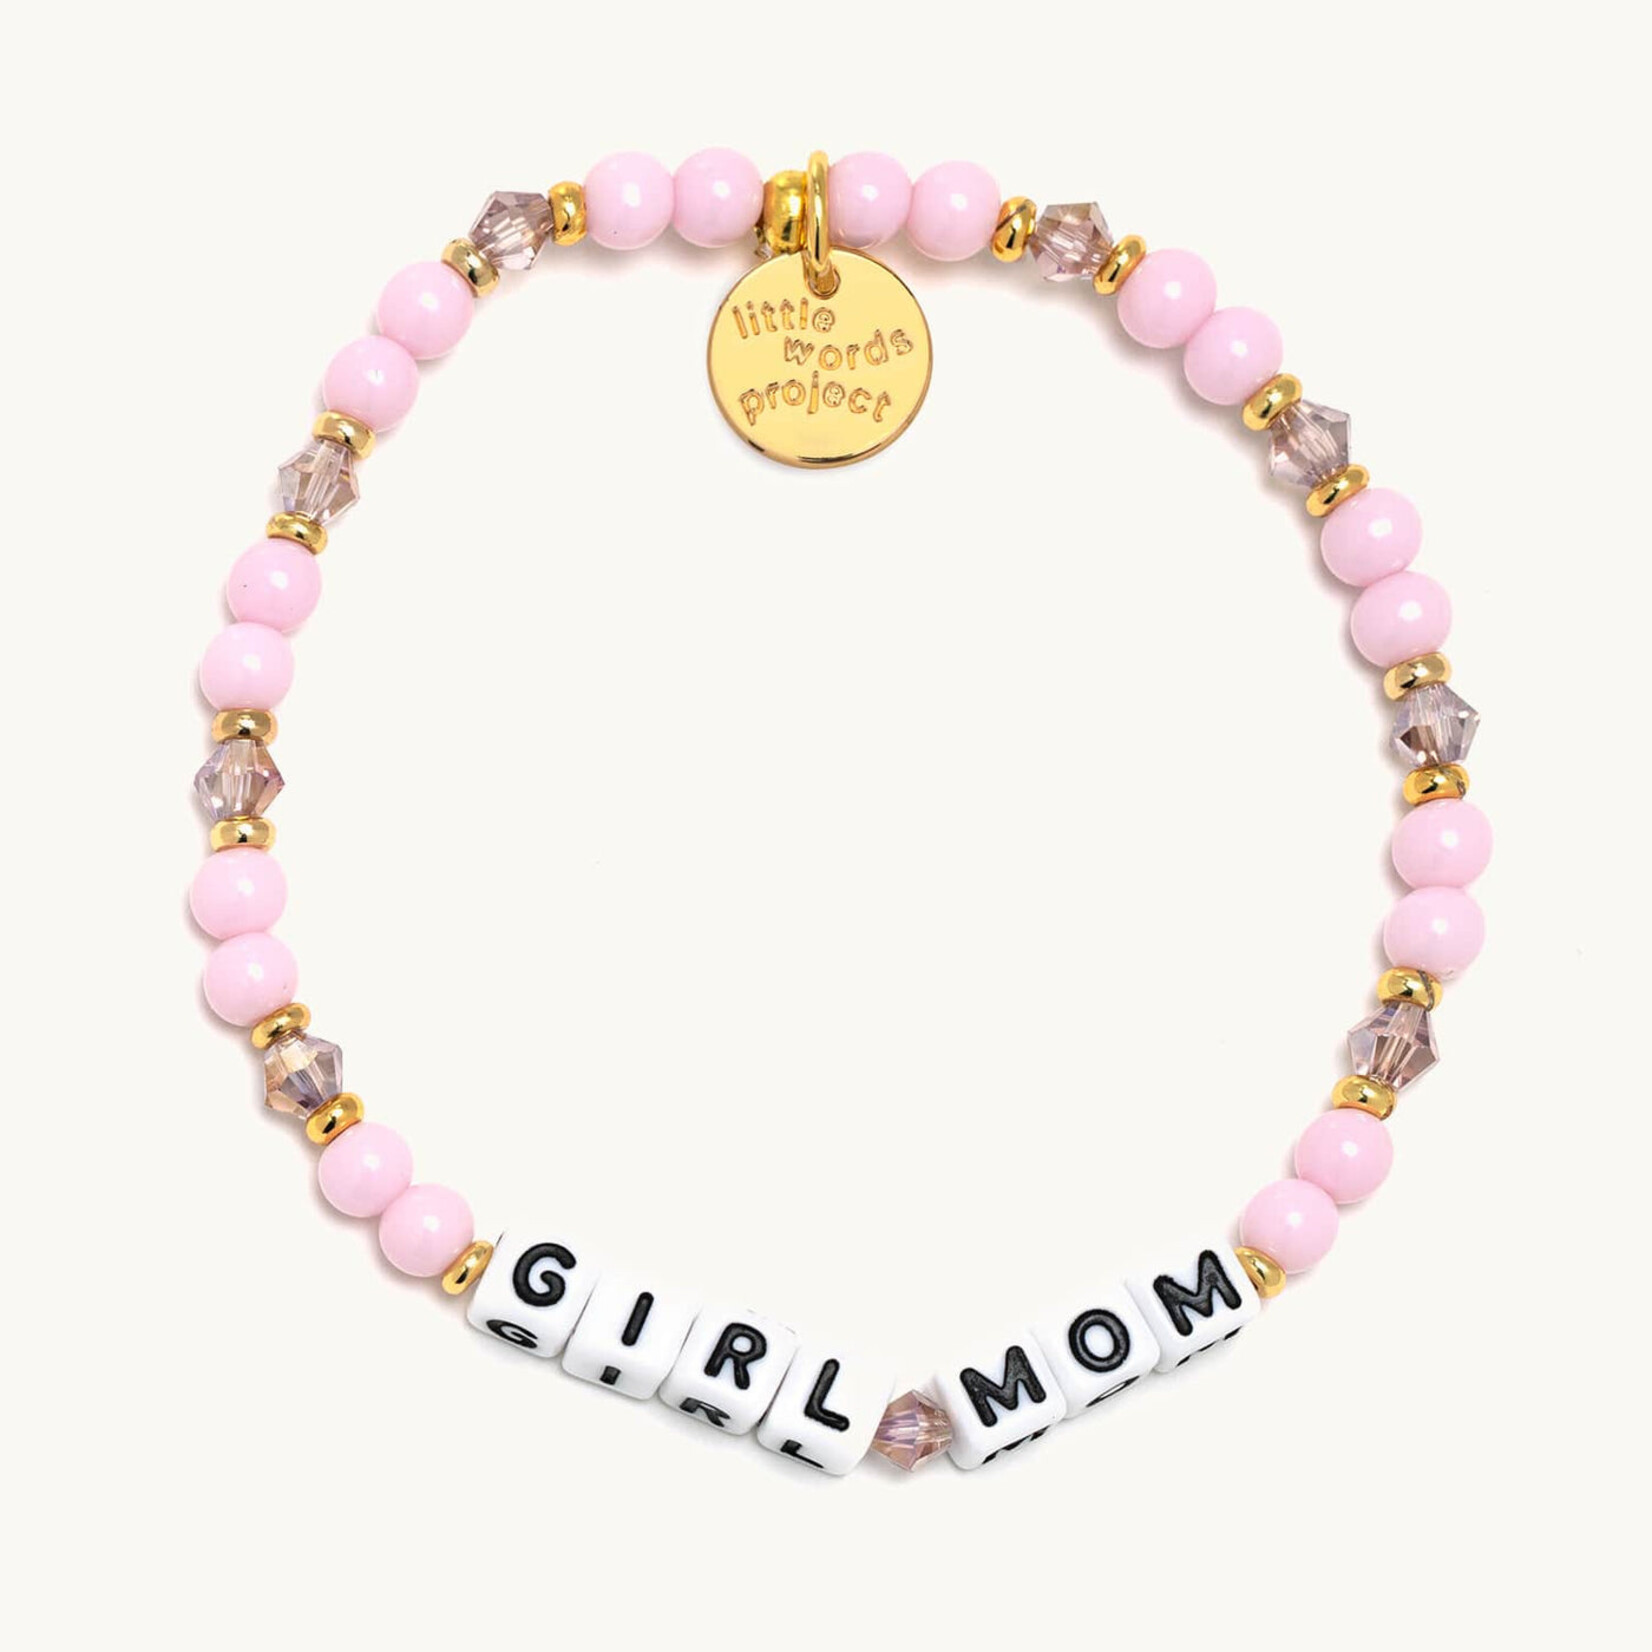 Little Words Project - Girl Mom - Blush Worthy